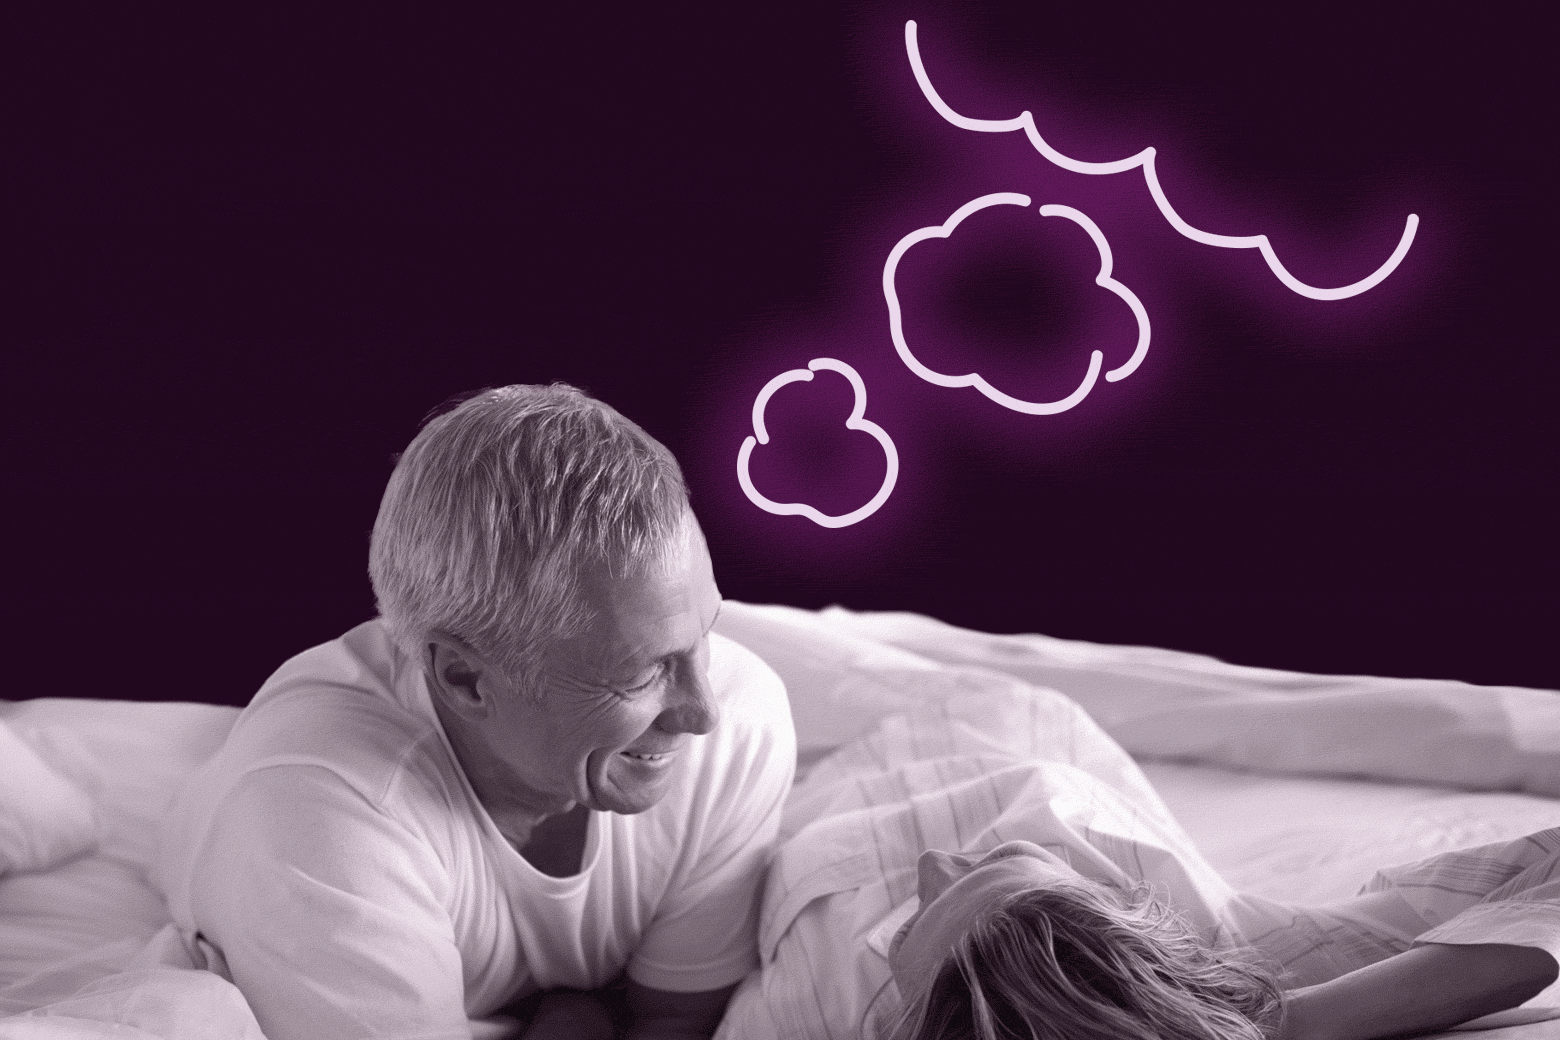 A person smiles at another person in bed. An illustrated thought bubble appears above their head.